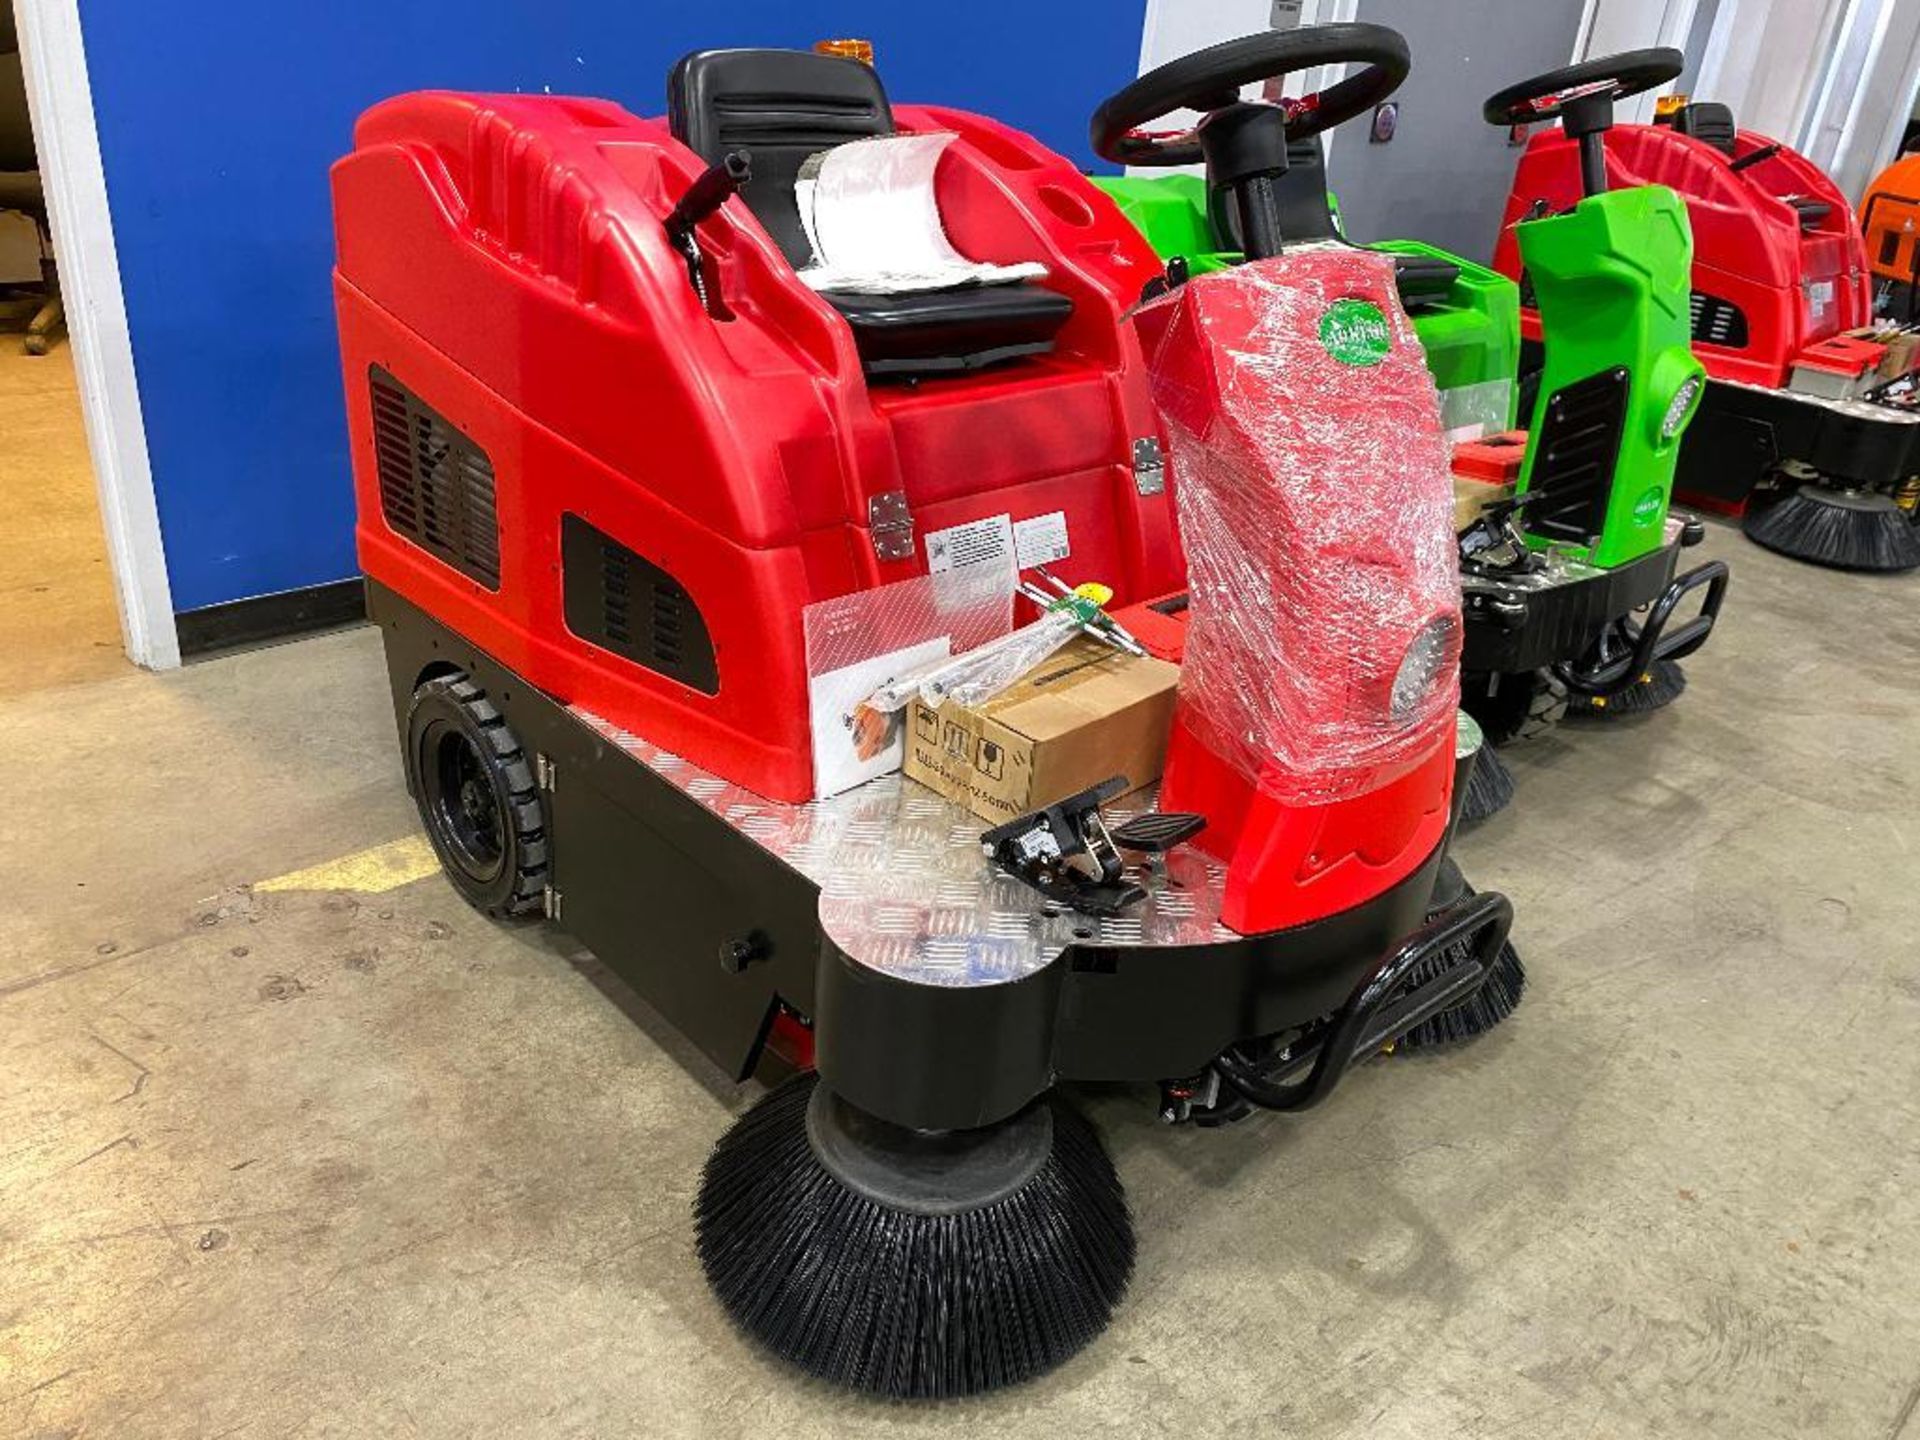 New 2022 Aokeqi 0S-V2 55" Wide Ride-On Electric Industrial Floor Sweeper - Image 2 of 10